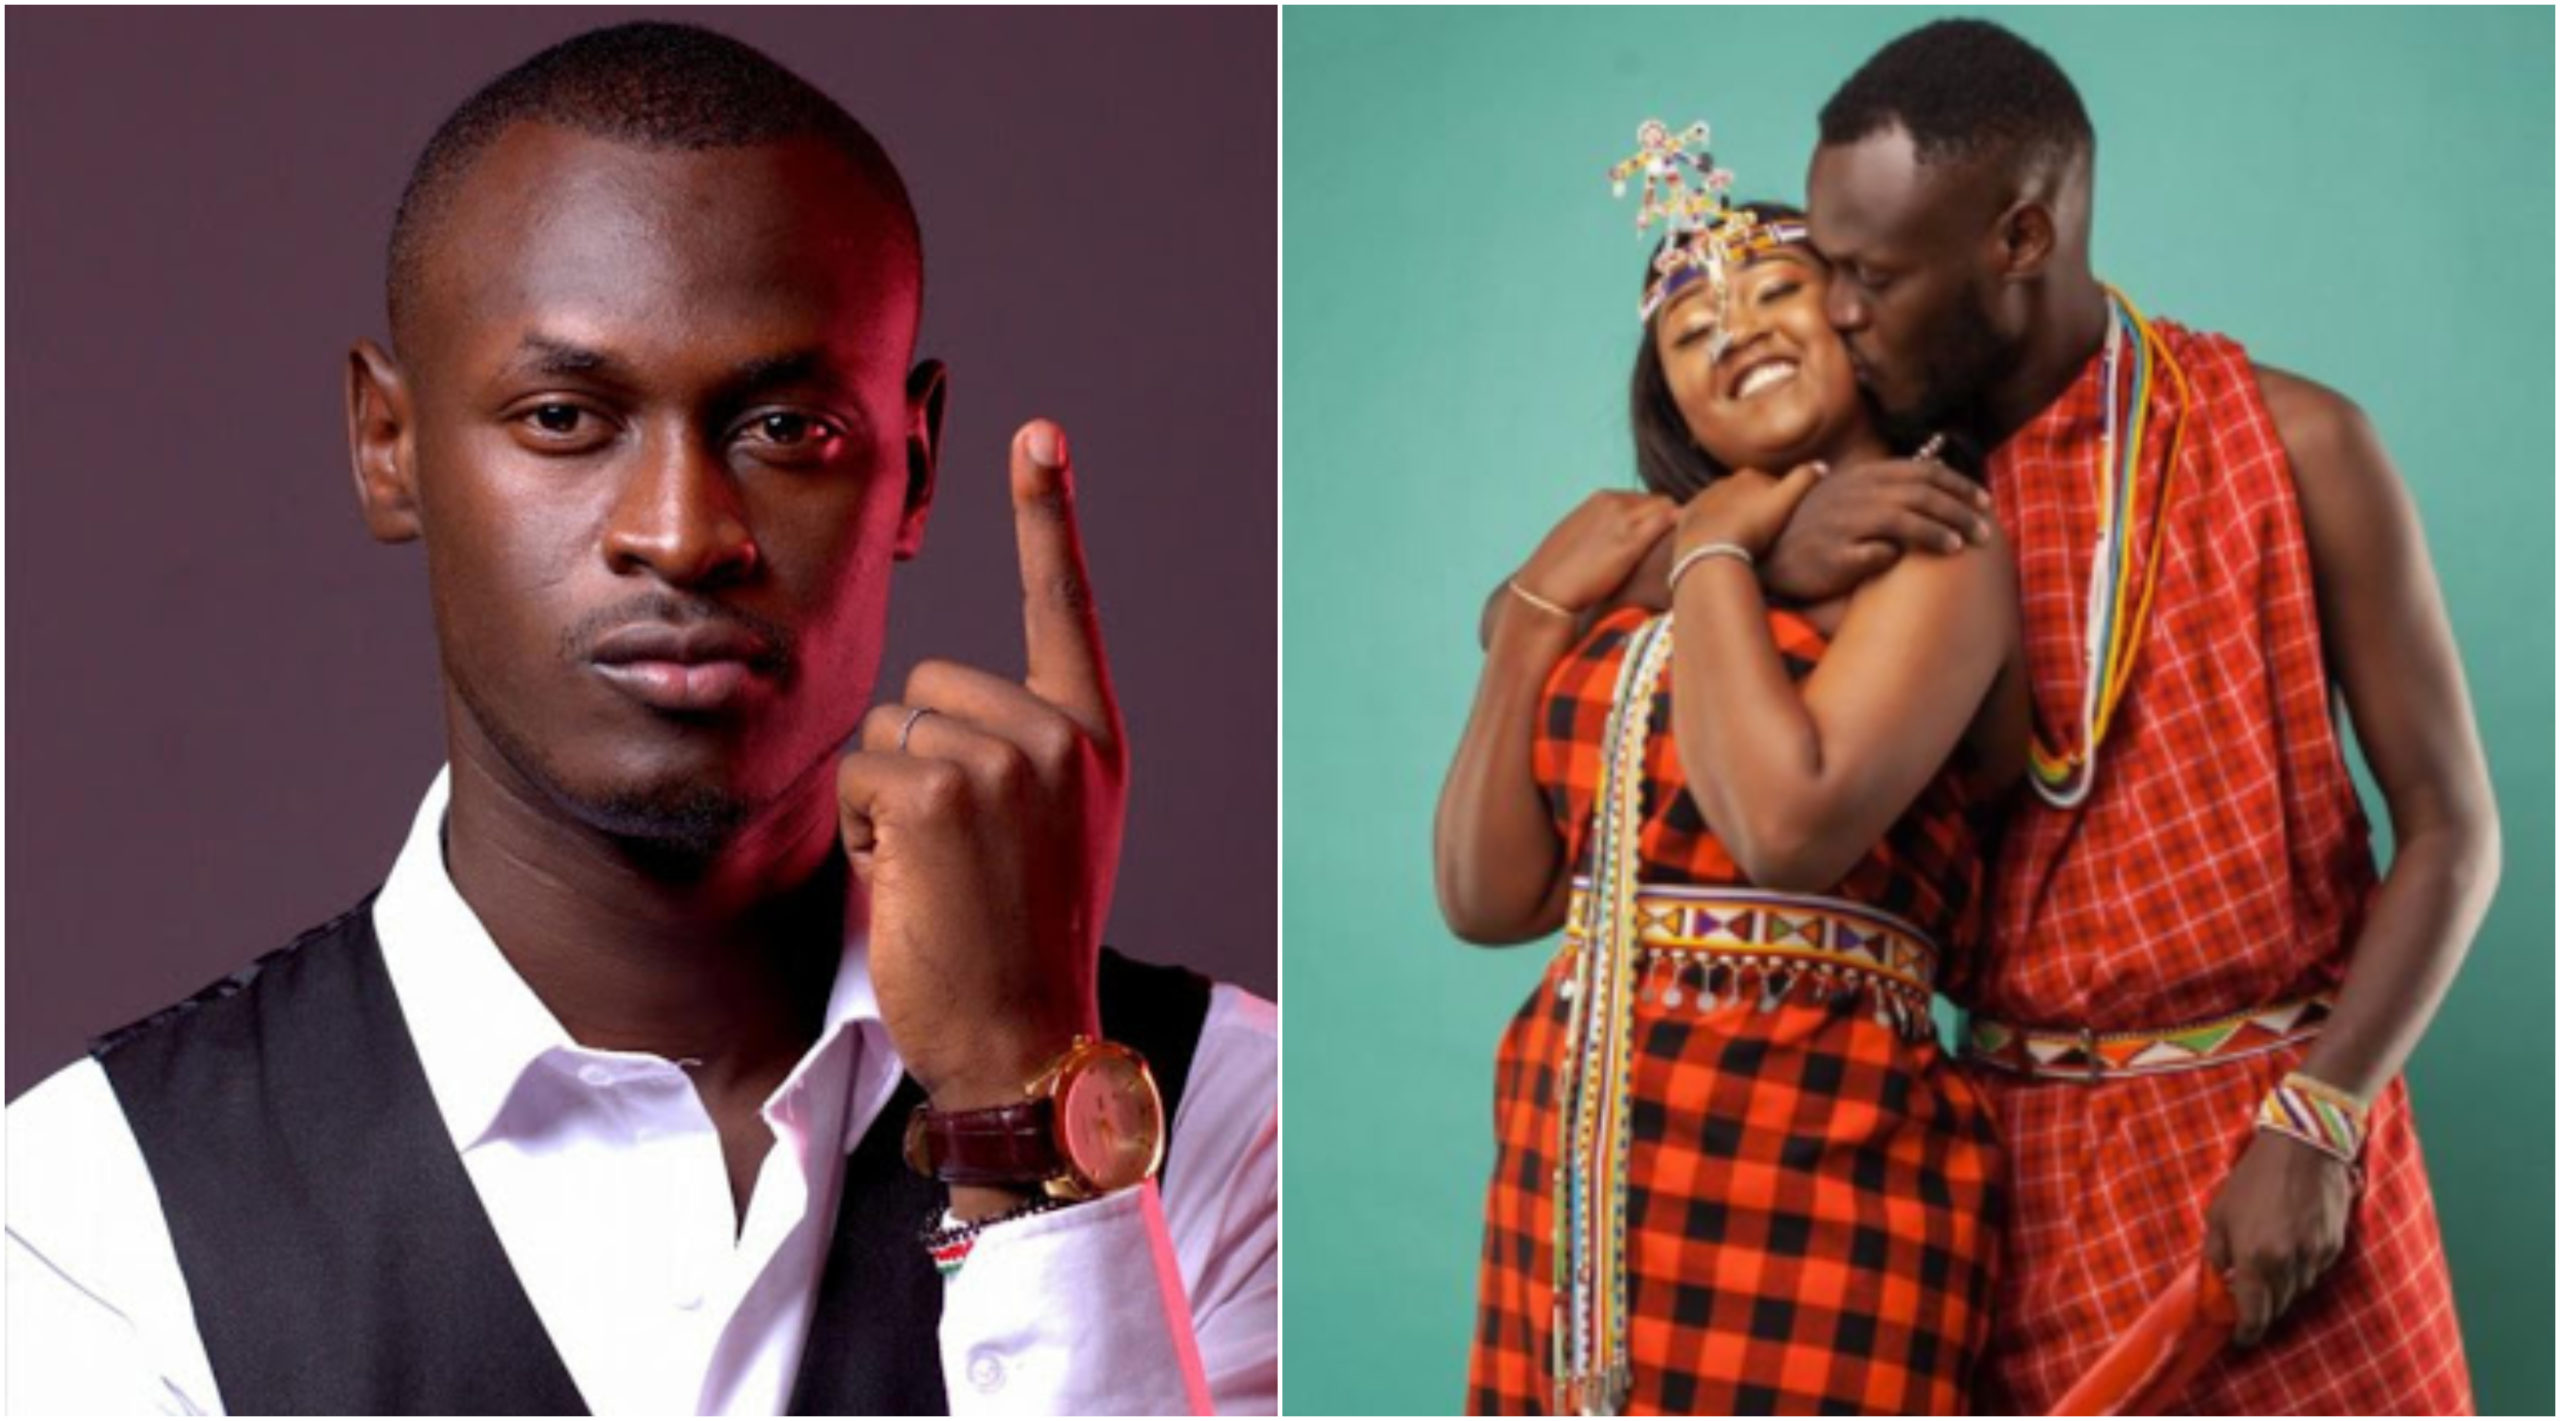 King Kaka sets the record straight after viral family photo stirs controversy